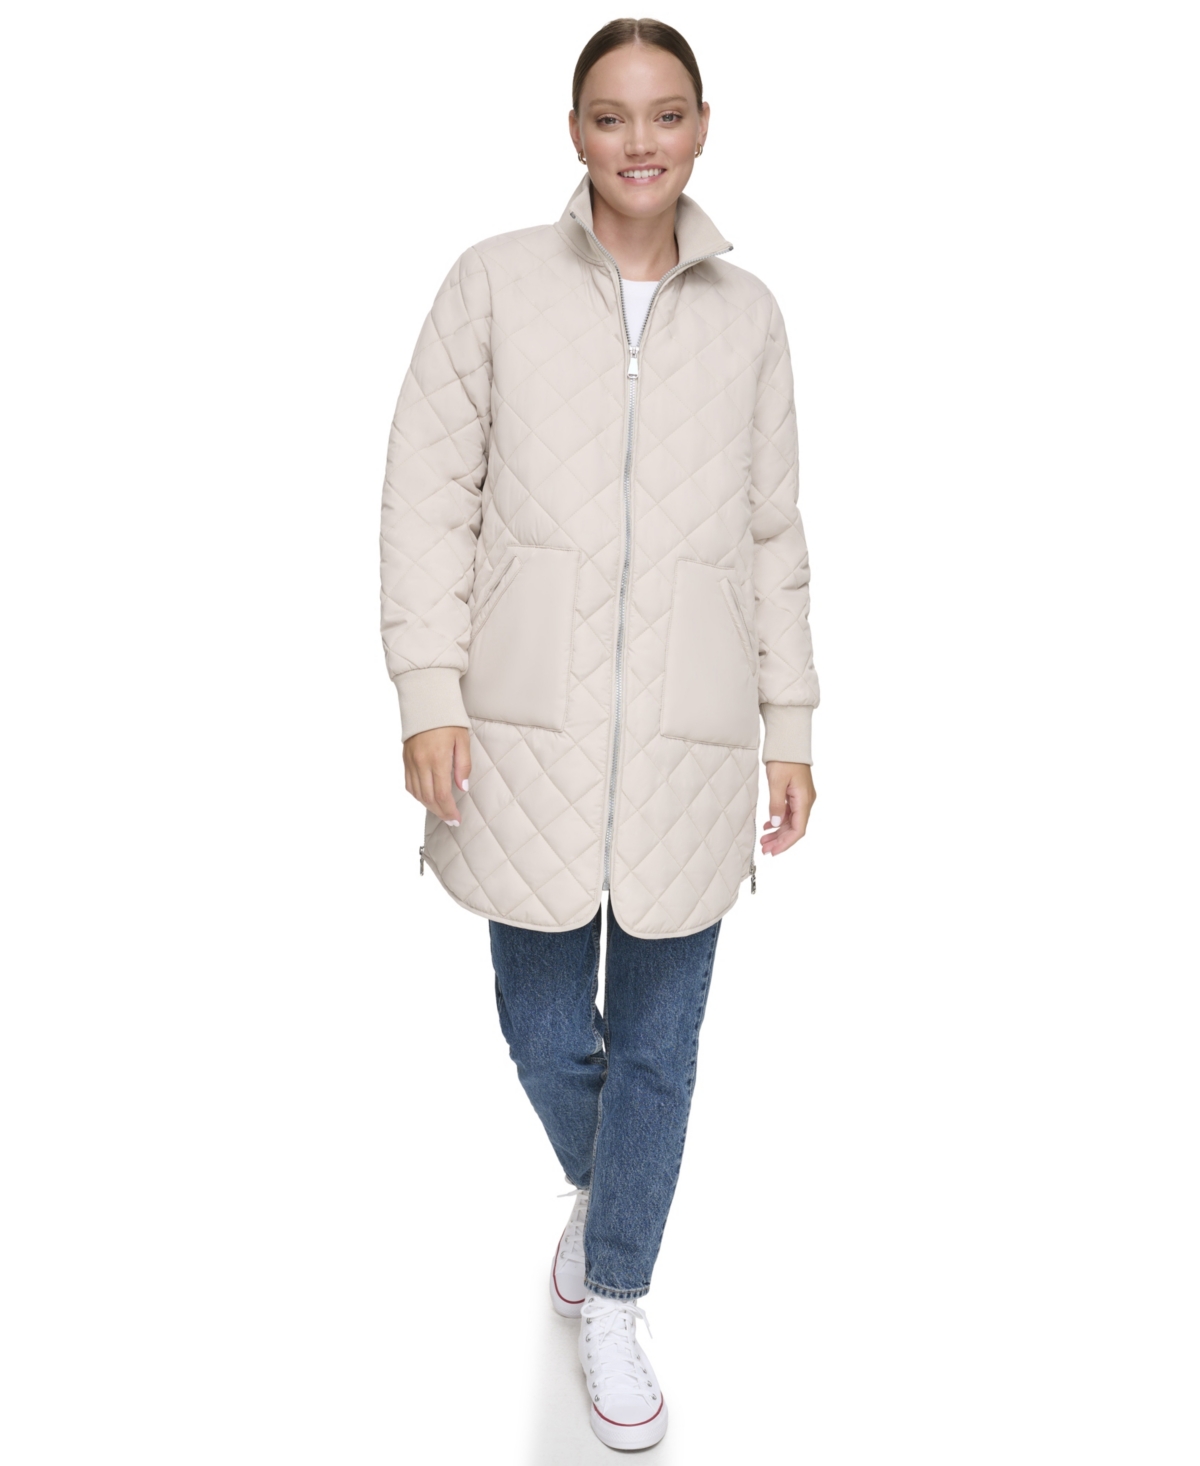 Women's Quilted Longline Jacket With Side Zipper Vents - Twine